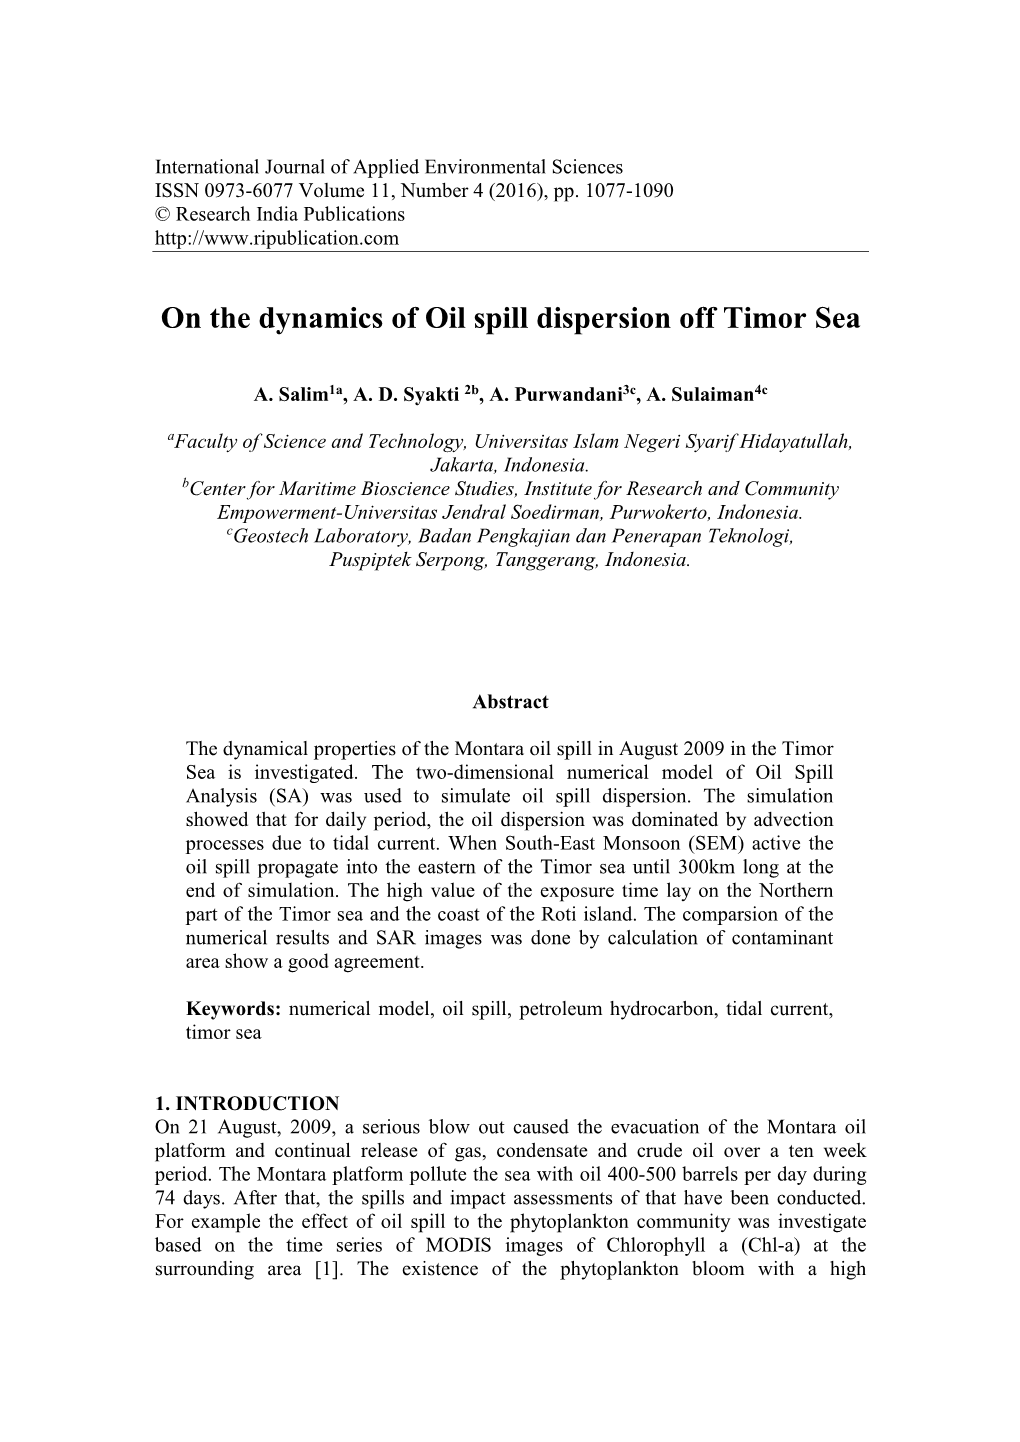 On the Dynamics of Oil Spill Dispersion Off Timor Sea